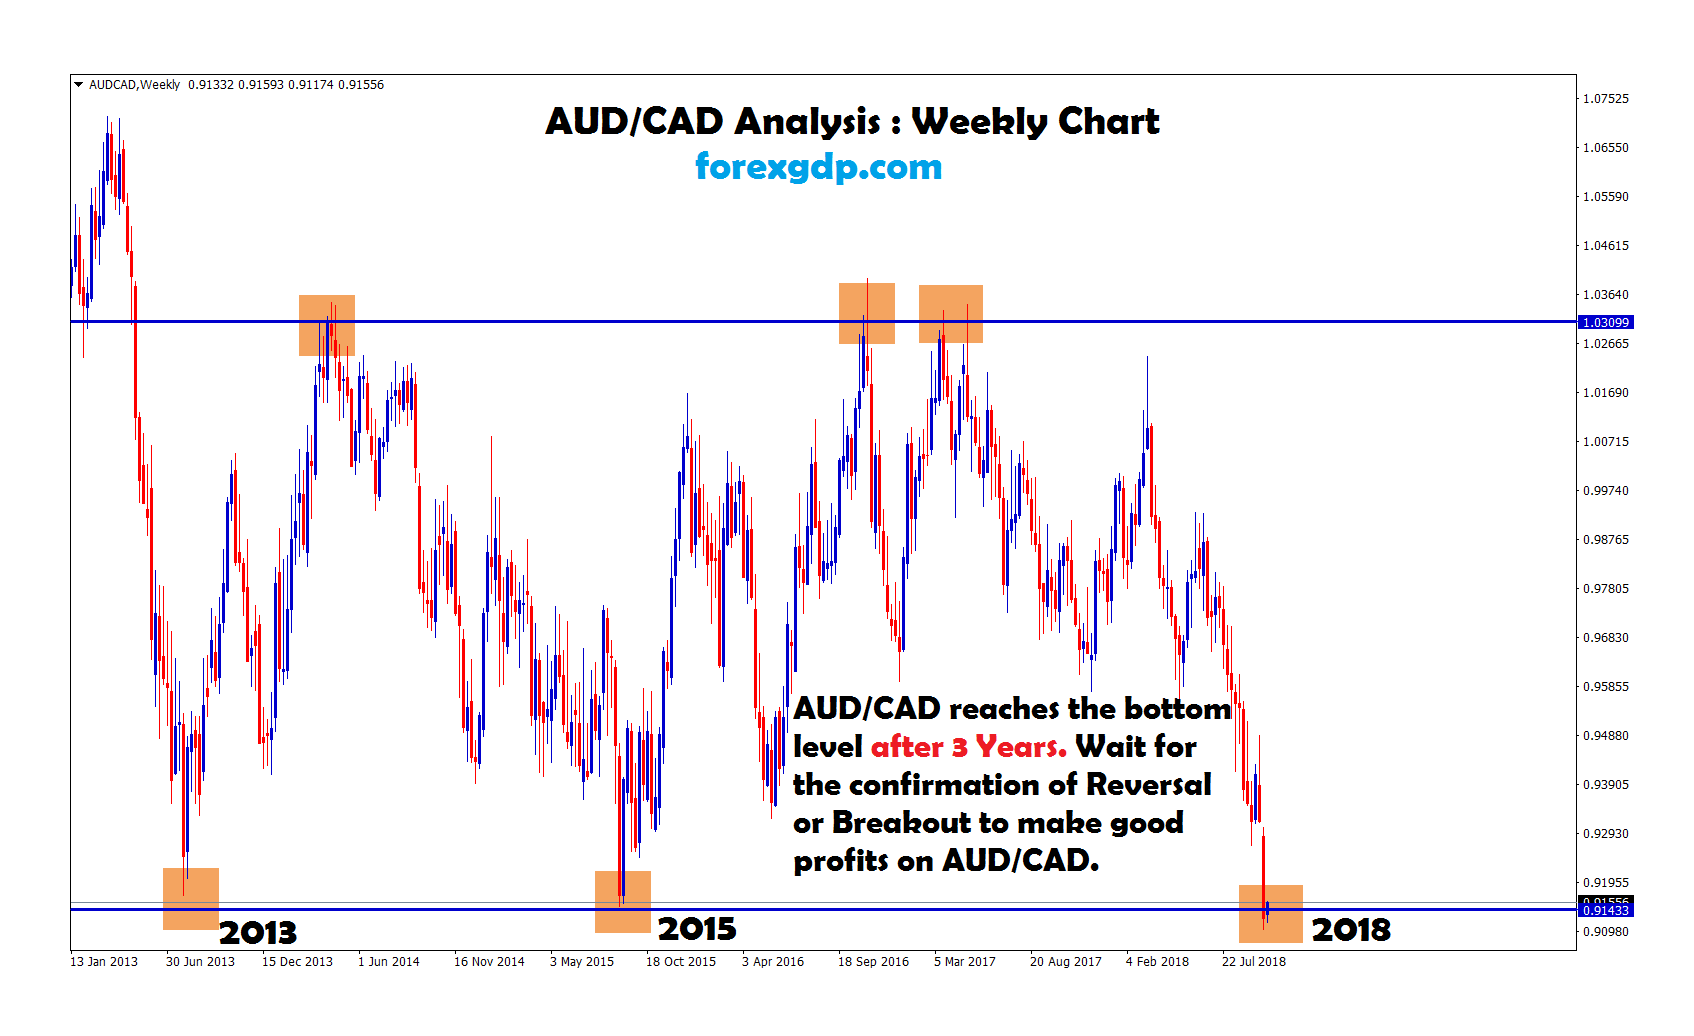 aud cad reaches the triple top and triple bottom